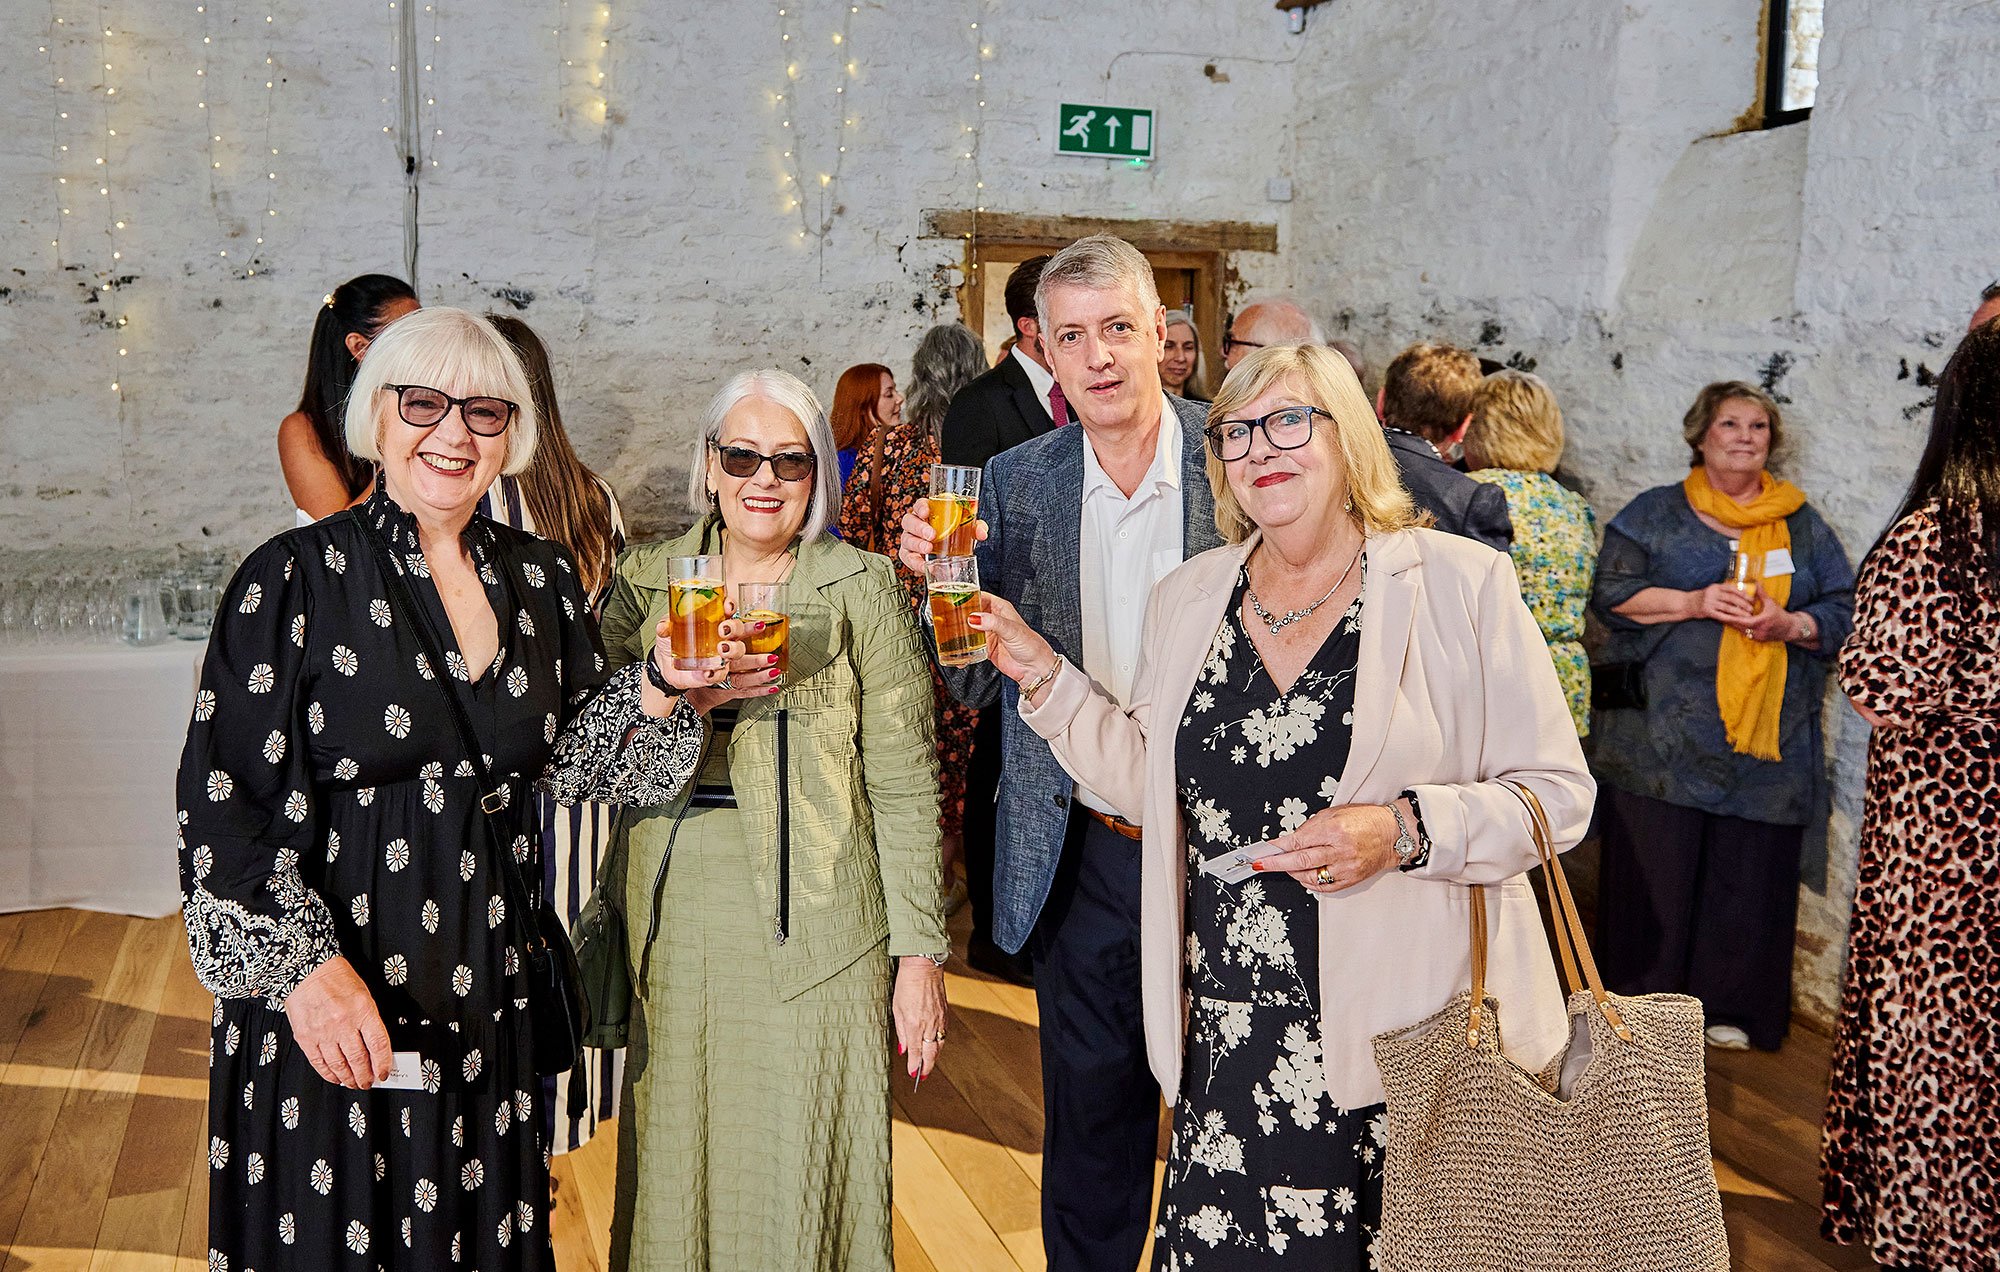 Guests inside the barn enjoying a welcome Pimms